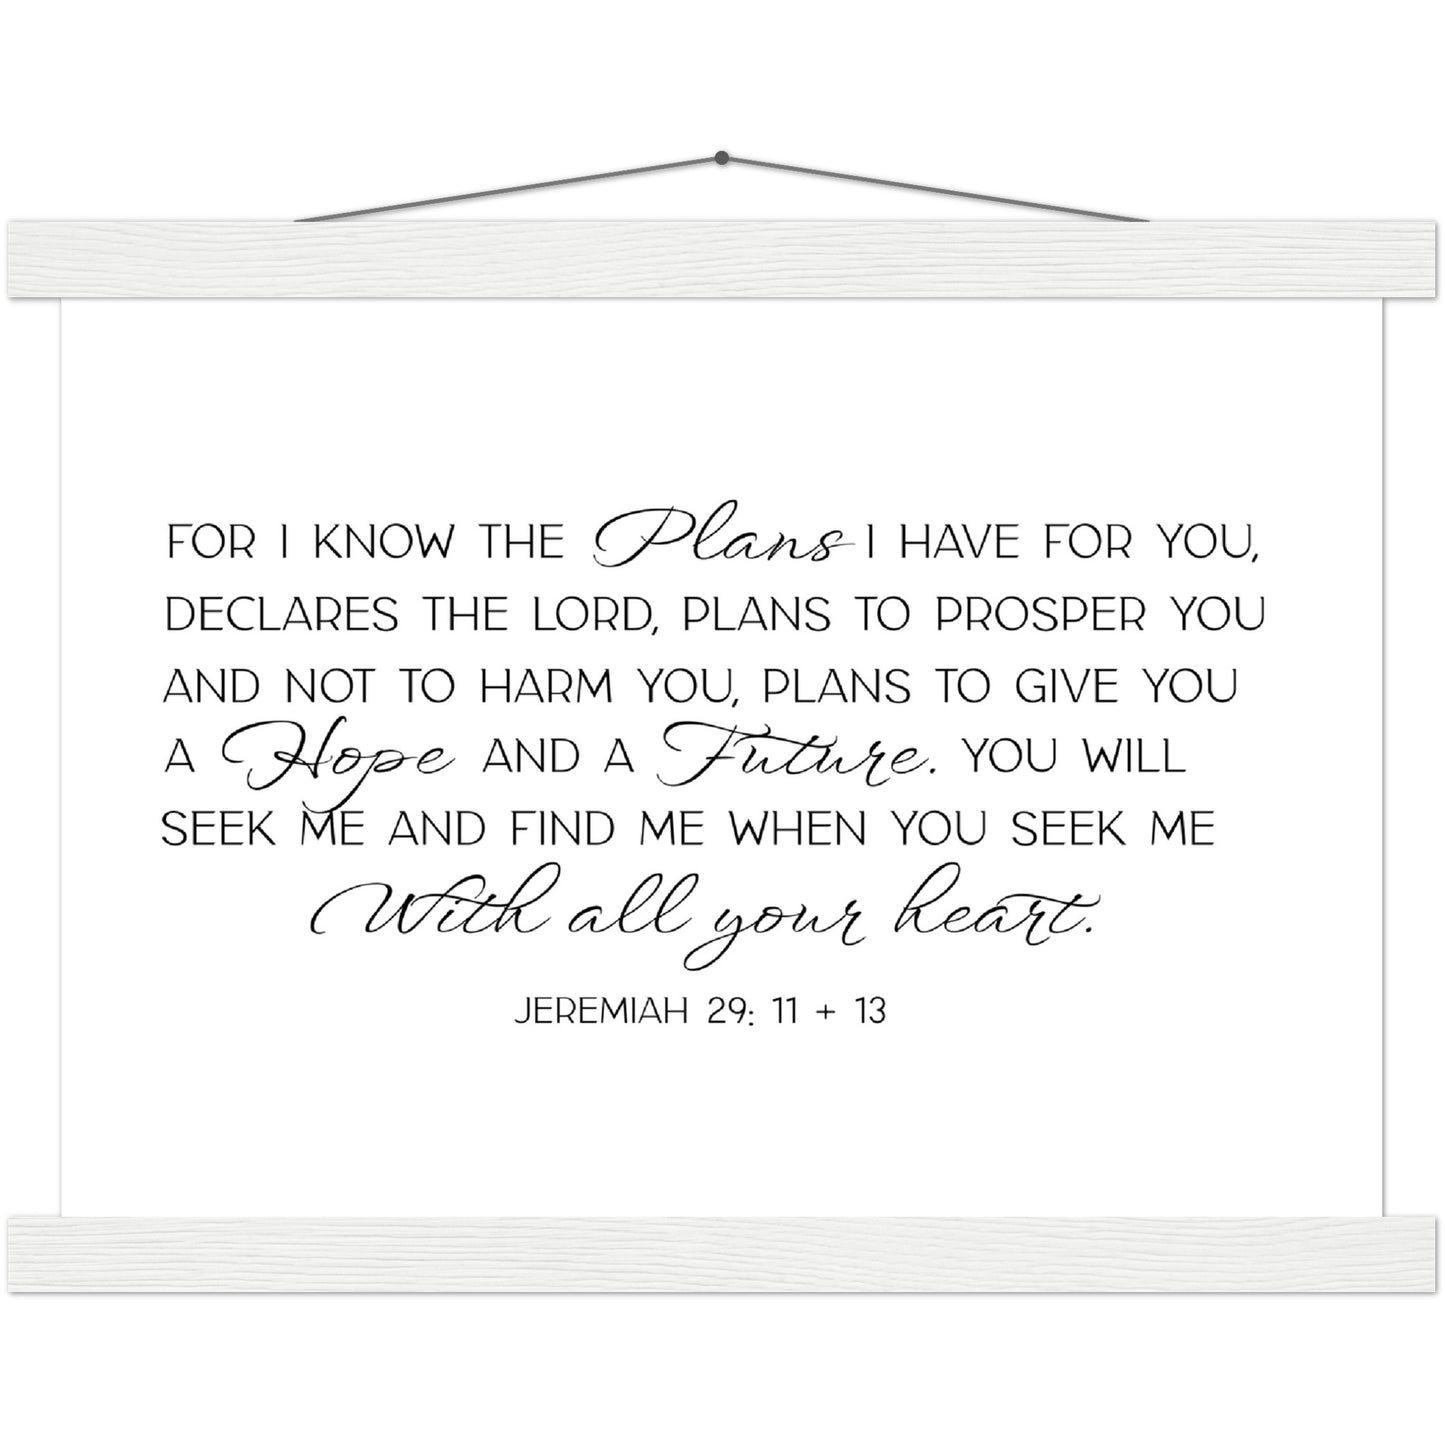 Home Decor | For I Know The Plans | Christian Wall Art | Jeremiah 29:11 | Premium Poster with Banner Wood